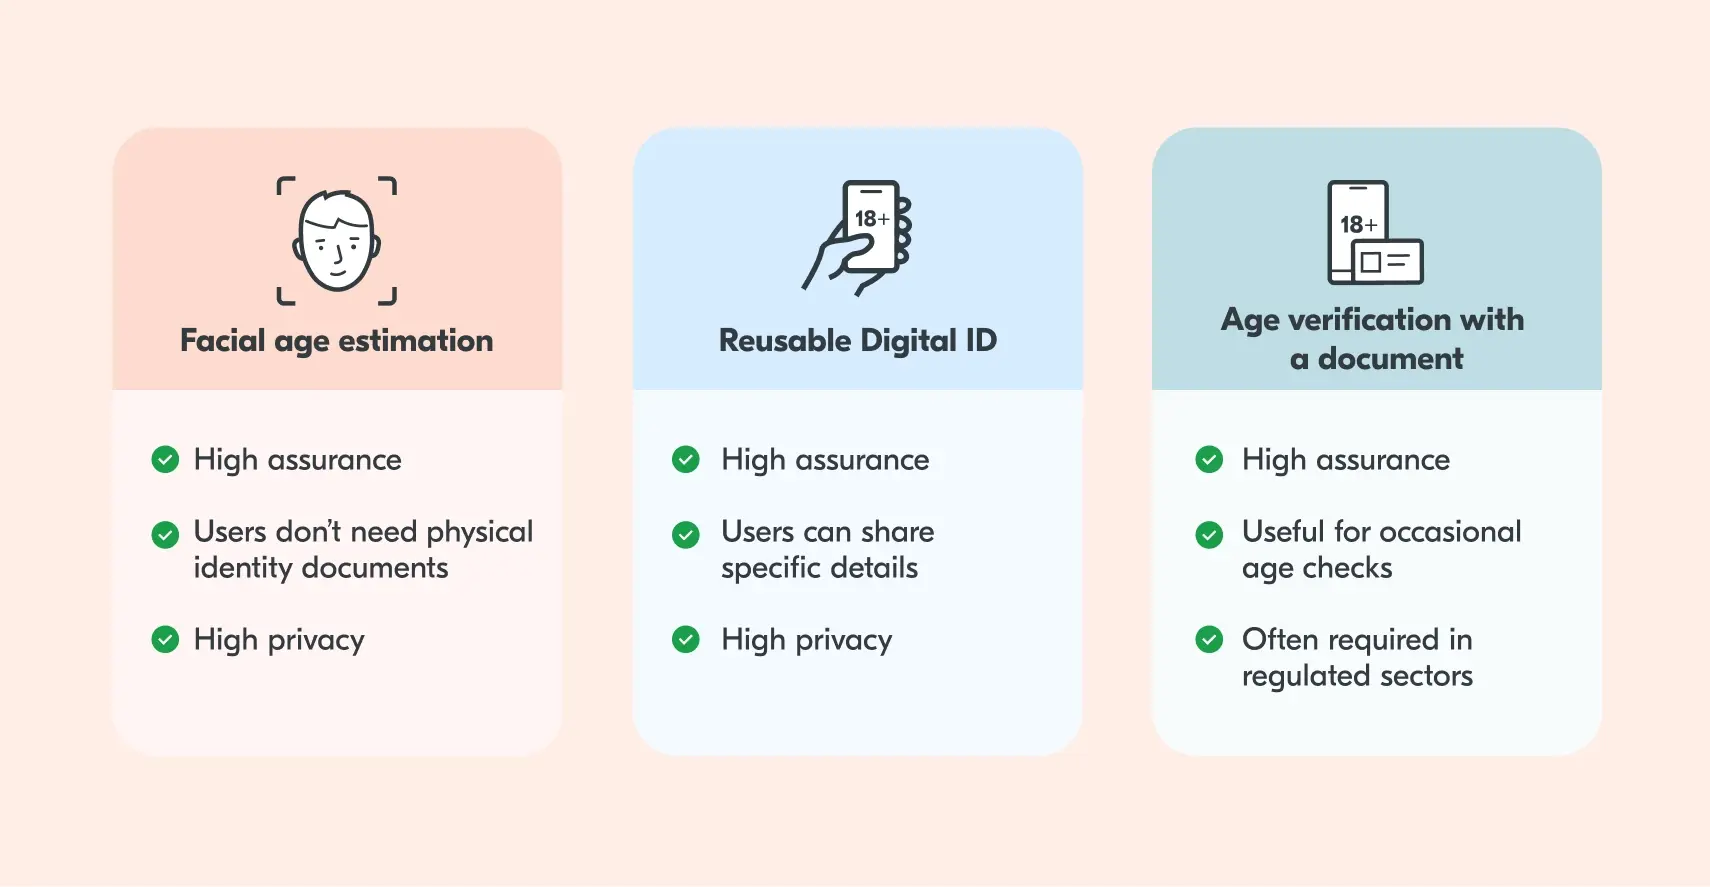 An image of a table comparing age assurance methods. The first column is titled "Facial age estimation" under which the list says "High assurance; Users don't need physical identity documents; High privacy". The second column is titled "Reusable Digital ID" under which the list reads "High assurance, Users can share specific details' High privacy". The final column is titled "Age verification with a document", under which the list reads "High assurance; Useful for occasional age checks, Often required in regulated sectors".